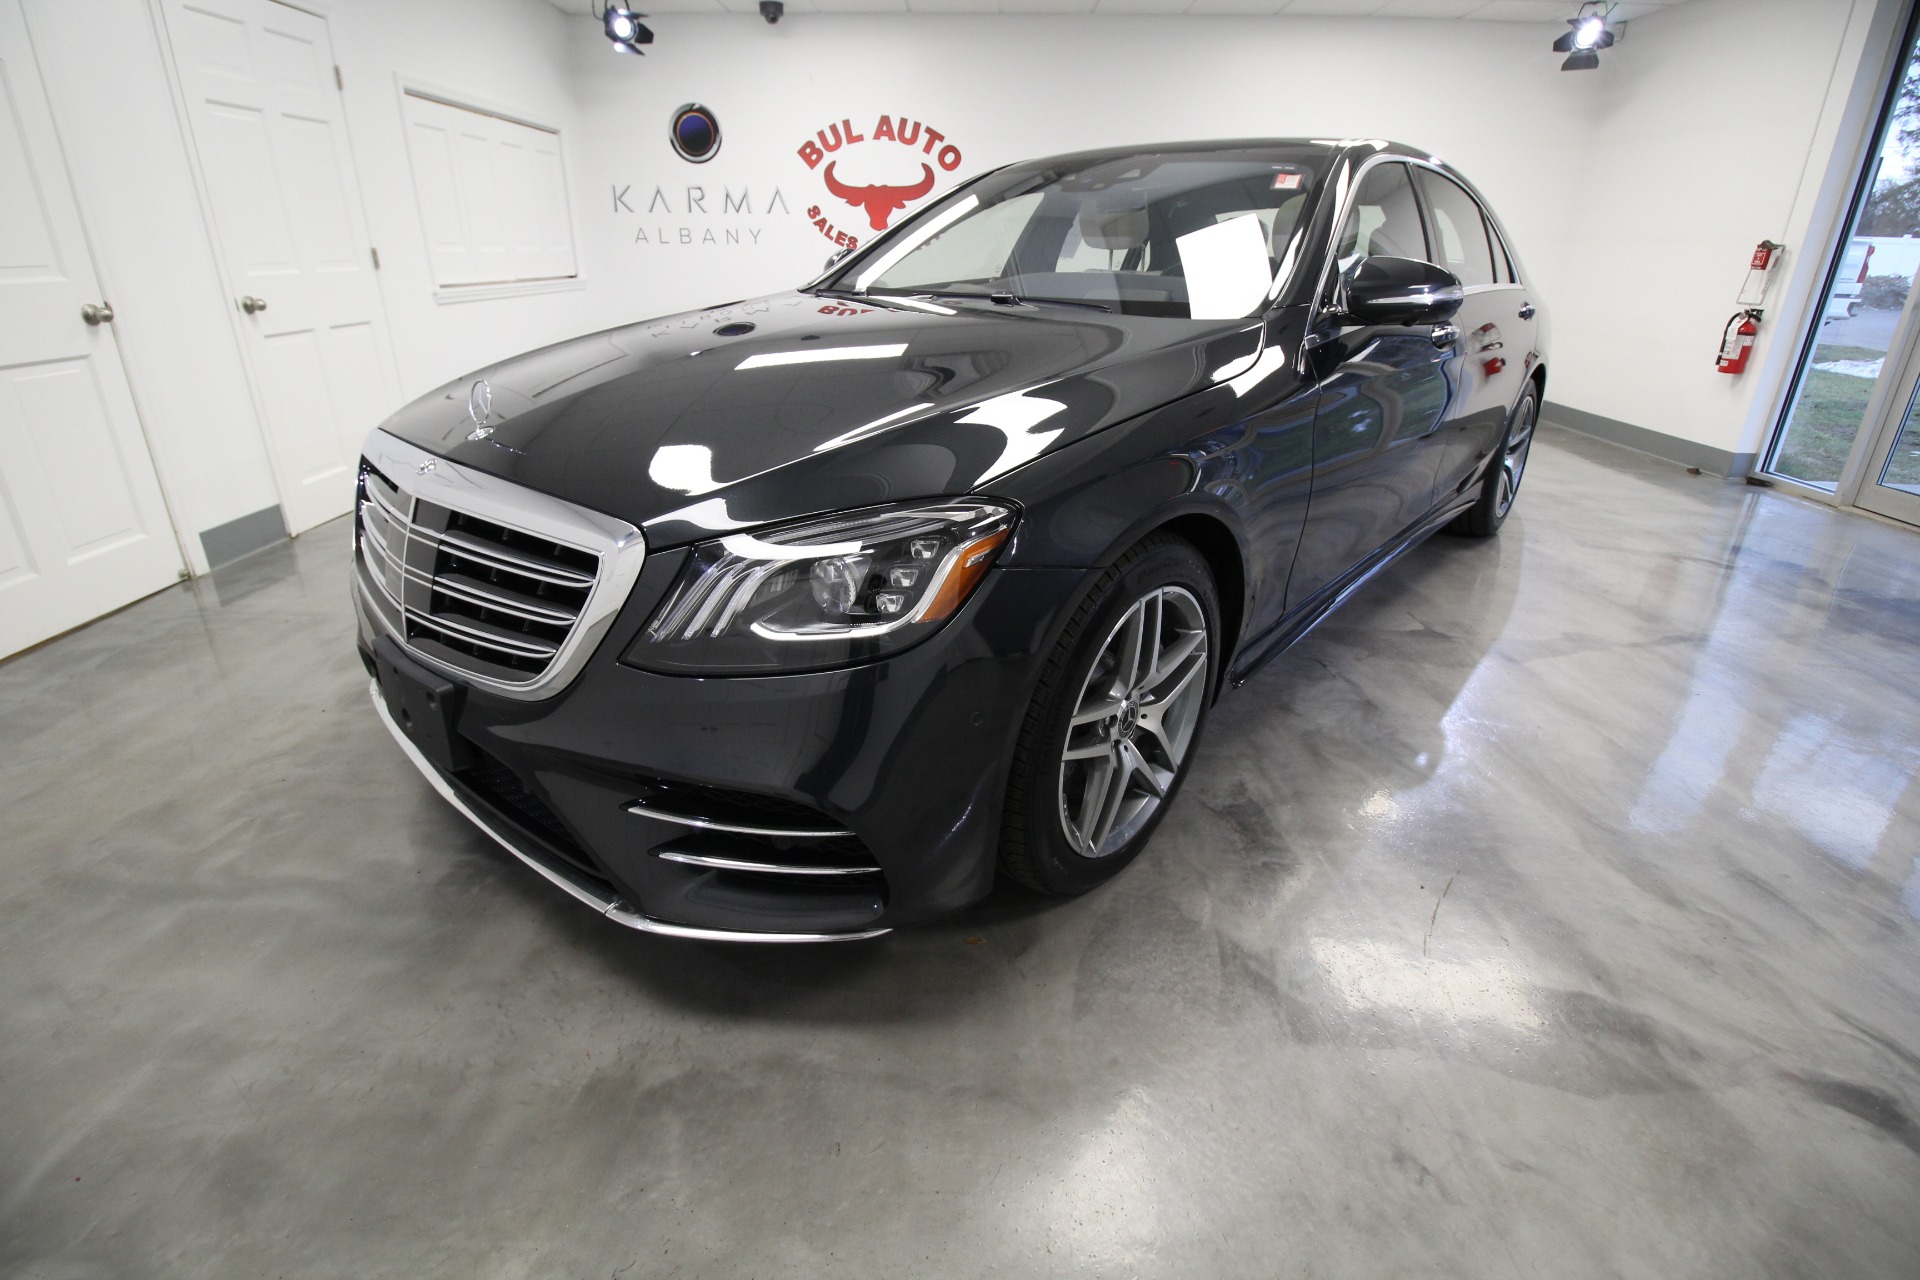 Used 2019 Magnetite Black Metallic Mercedes-Benz S-Class S560 4MATIC | Albany, NY